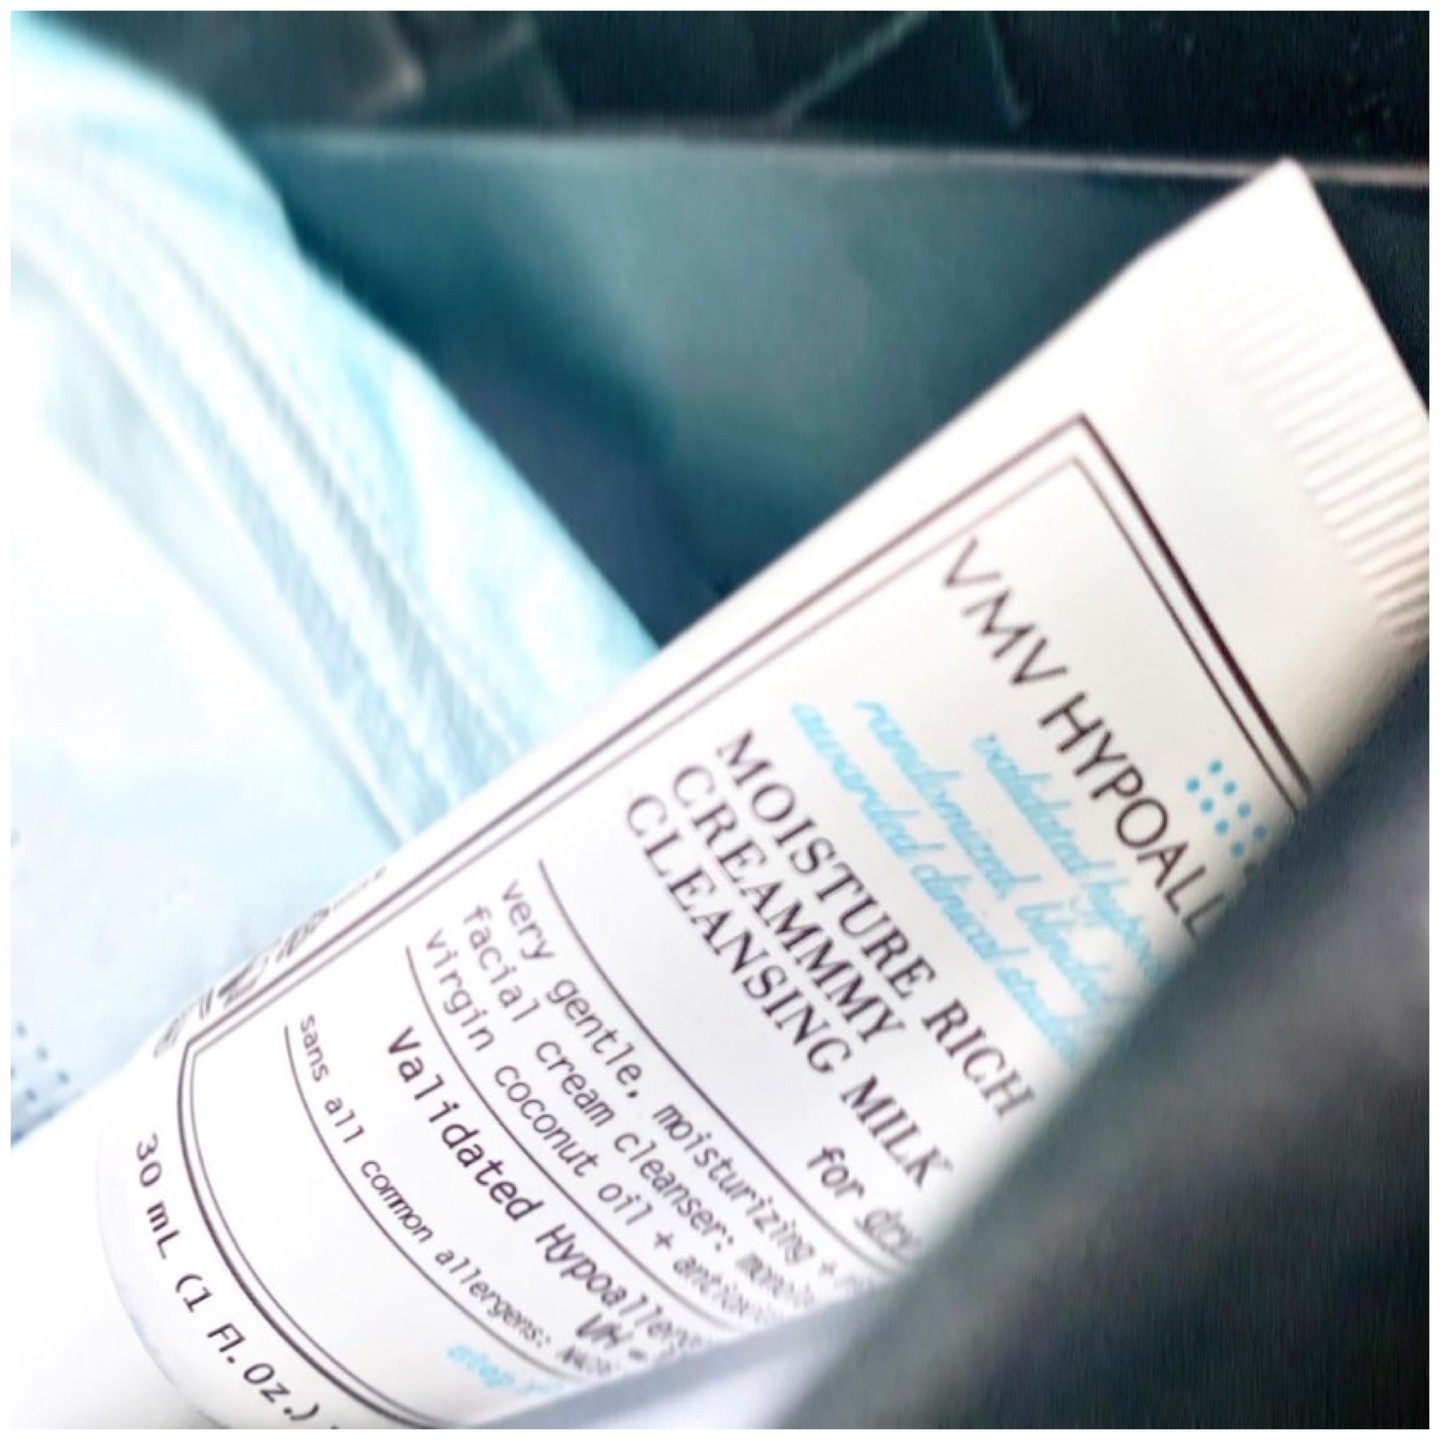 “In car…

Me: your skin looks amazing!

Him: It’s THIS thing! (holds up little tube of moisturizer) Eeeevery time you say my skin looks good it’s after I’ve put this on. It’s my superpower. I keep it in the car.

Me: (takes photo and wiggles bum in happy happy joy joy) 😁

#moisturizerismysuperpower 

One more side cuento: at event, as we’re being introduced, one of the mega talented contributors waves me over and goes “omg I’m such a fan! I only use VMV! It saved my skin!”

Those were her words.

And this is why we do what we “dew.” 🤗🙏🏽💕 gratitude and a half!”

•

Repost @lauraatvmv 
#FridayFinest #skinspiration #SavingTheWorldsSkin